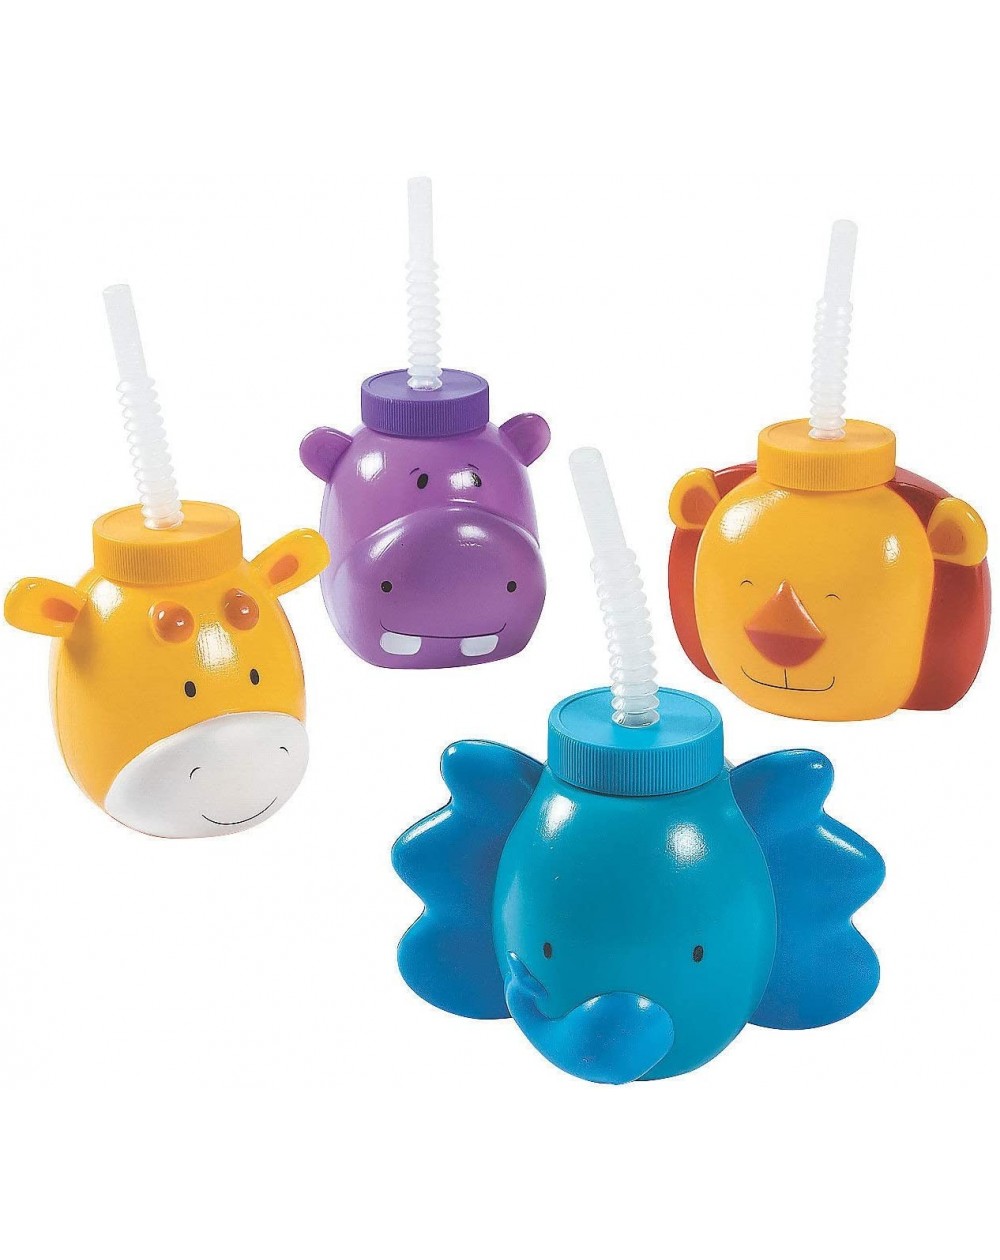 Party Tableware Zoo Animal Molded Cups with Lids - 1st Birthday and Party Supplies - 8 Pieces - C718O9H07K3 $16.38